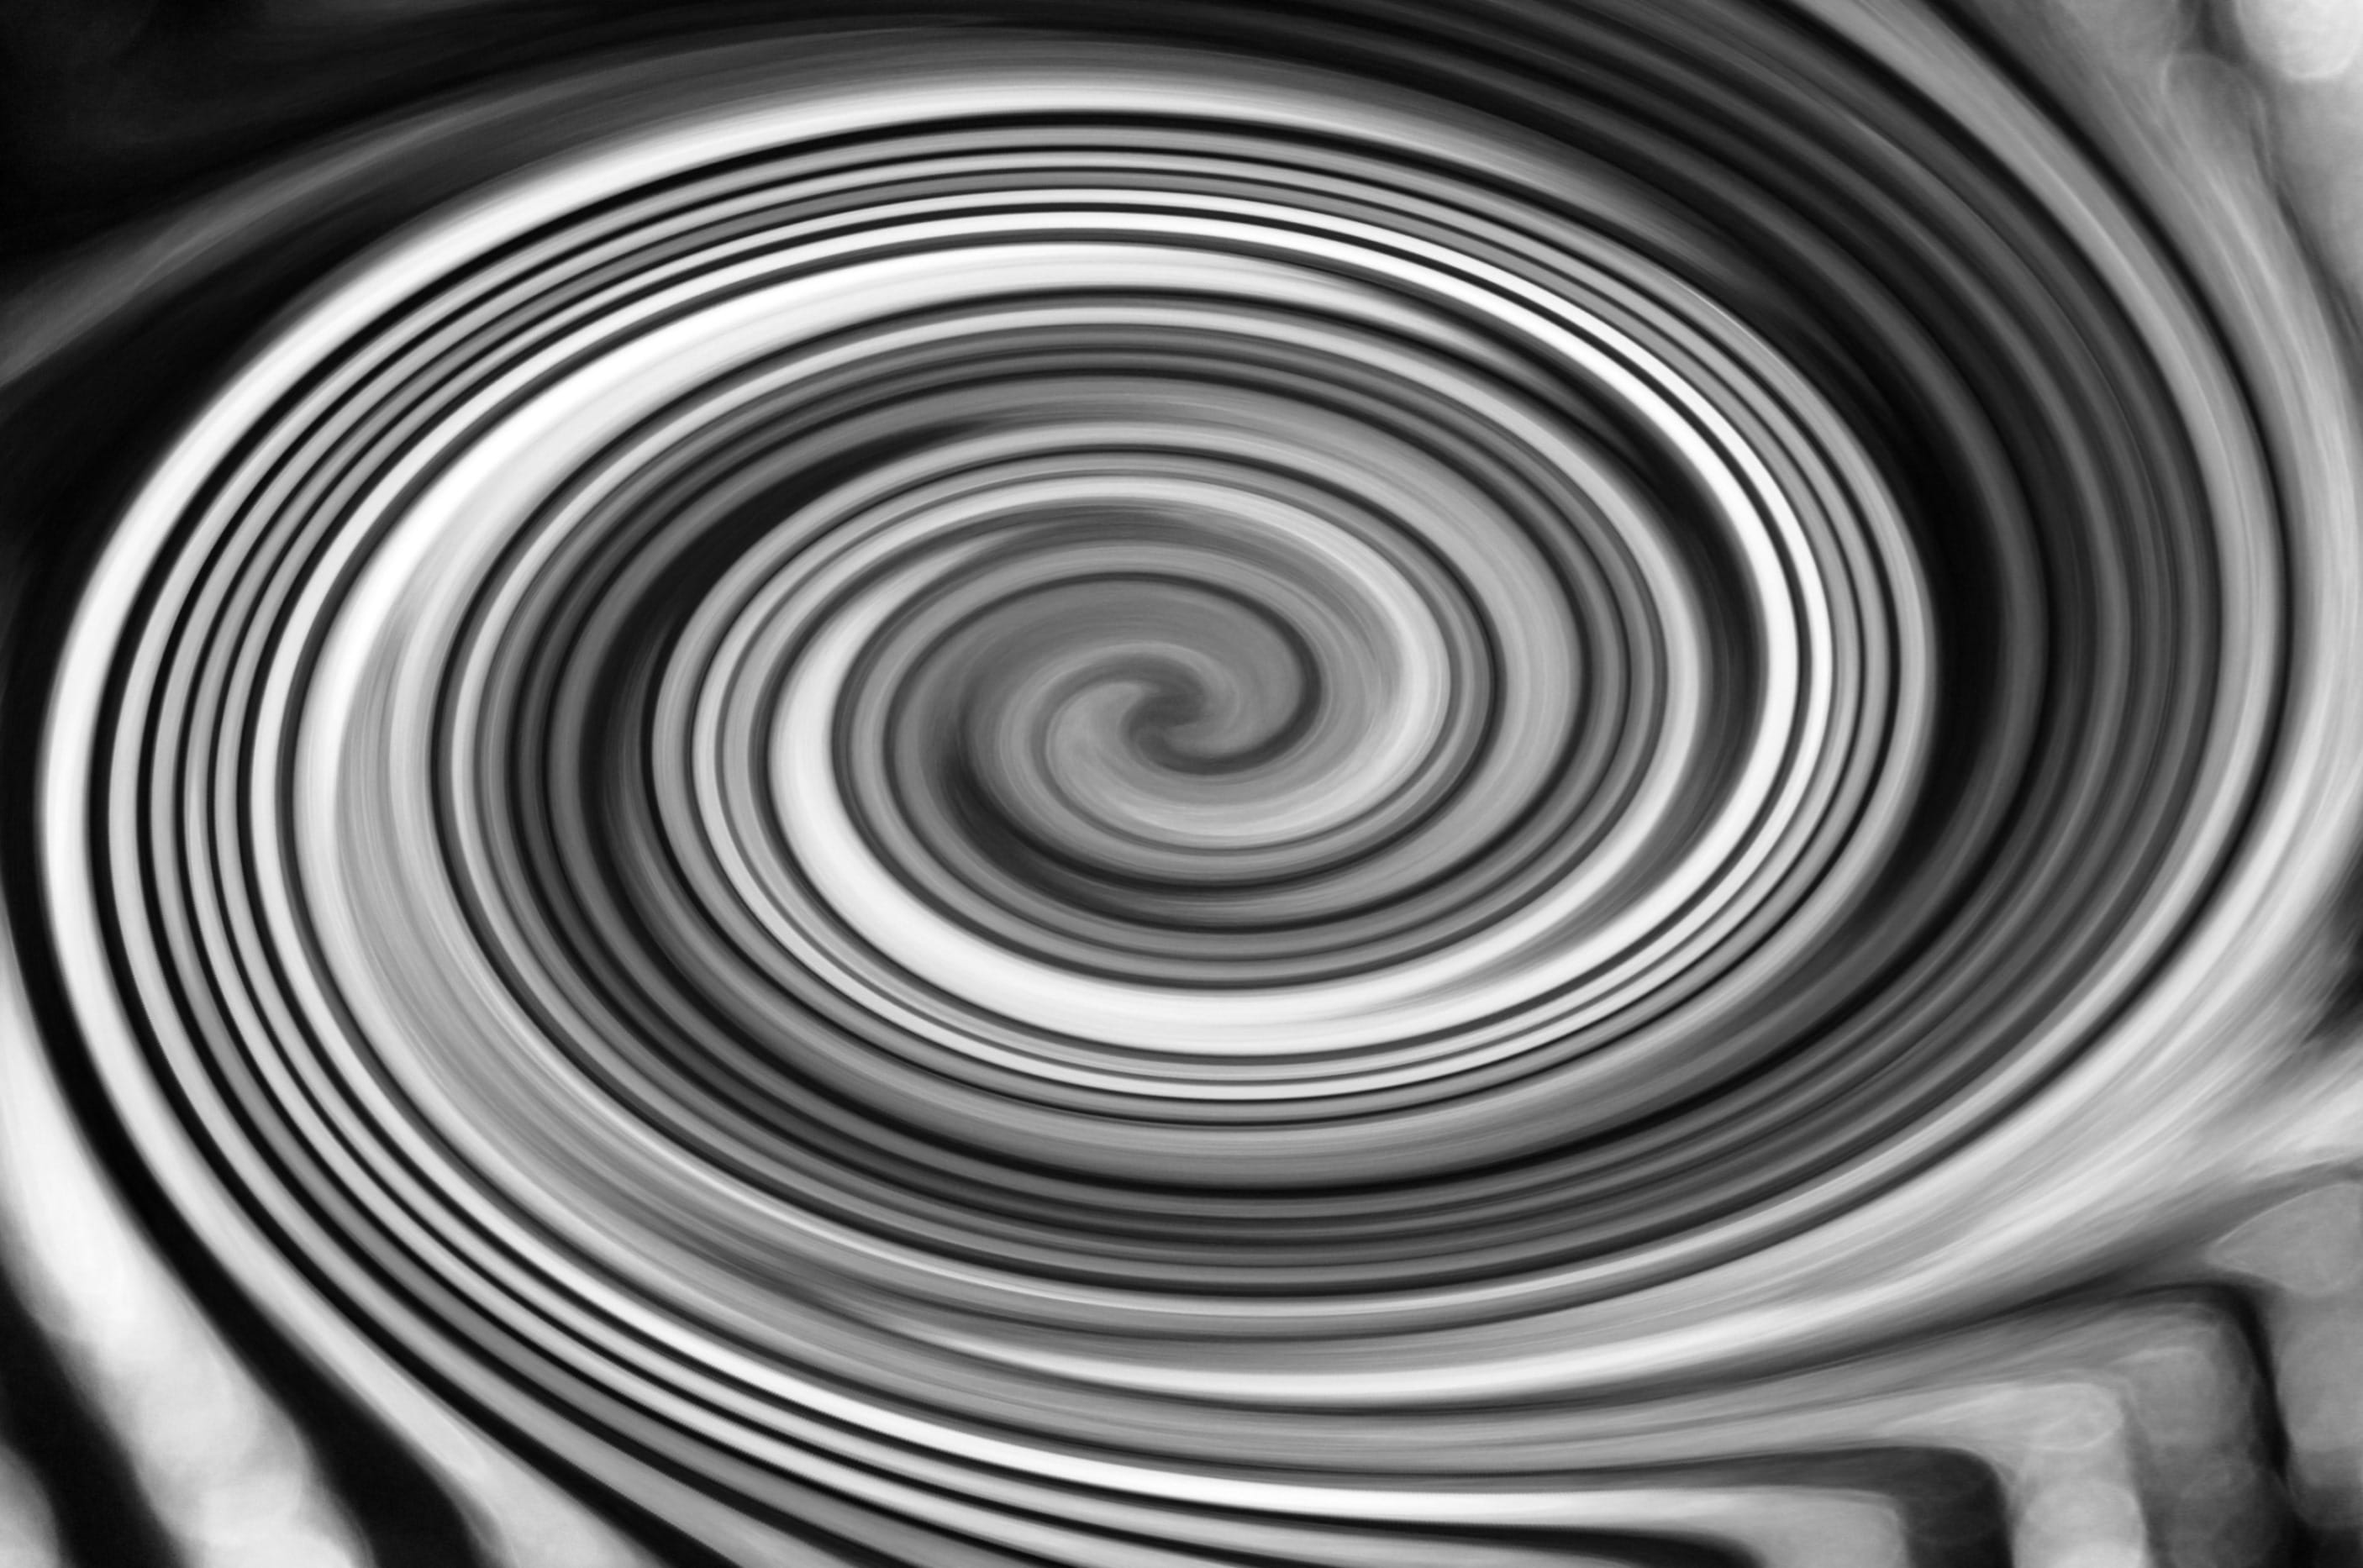 Free download | HD wallpaper: Abstract Black and White Spiral ...